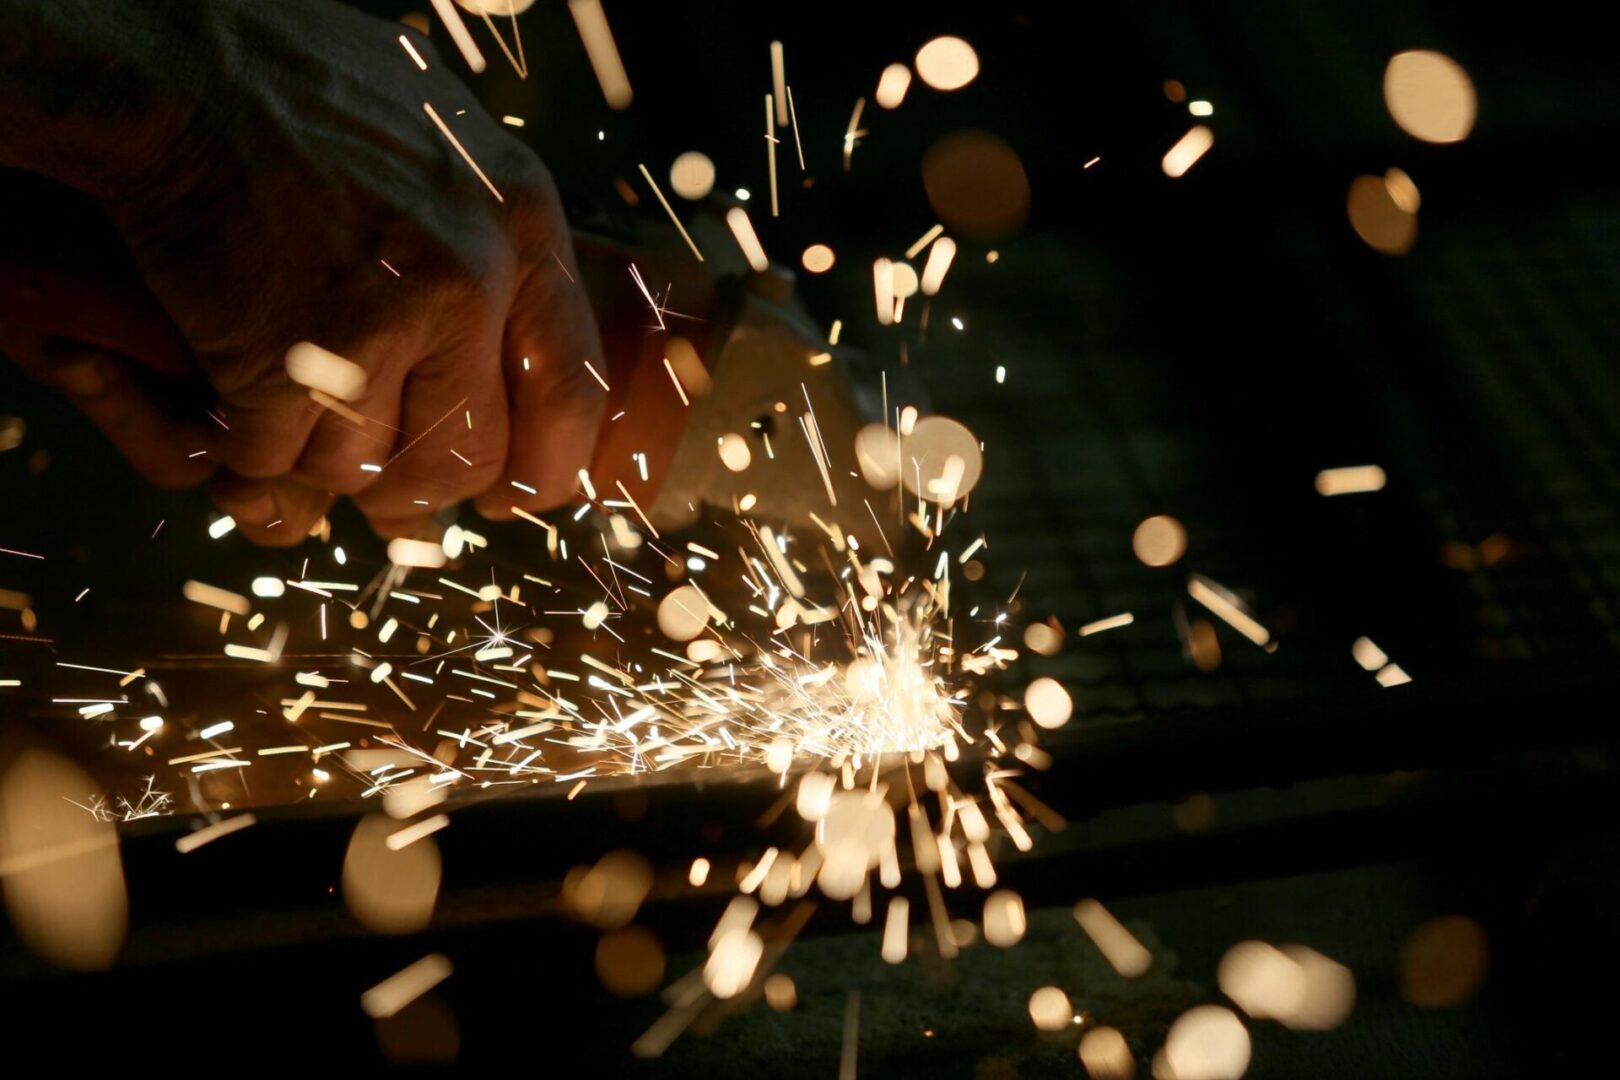 Black background with a close-up of bright welding sparklers